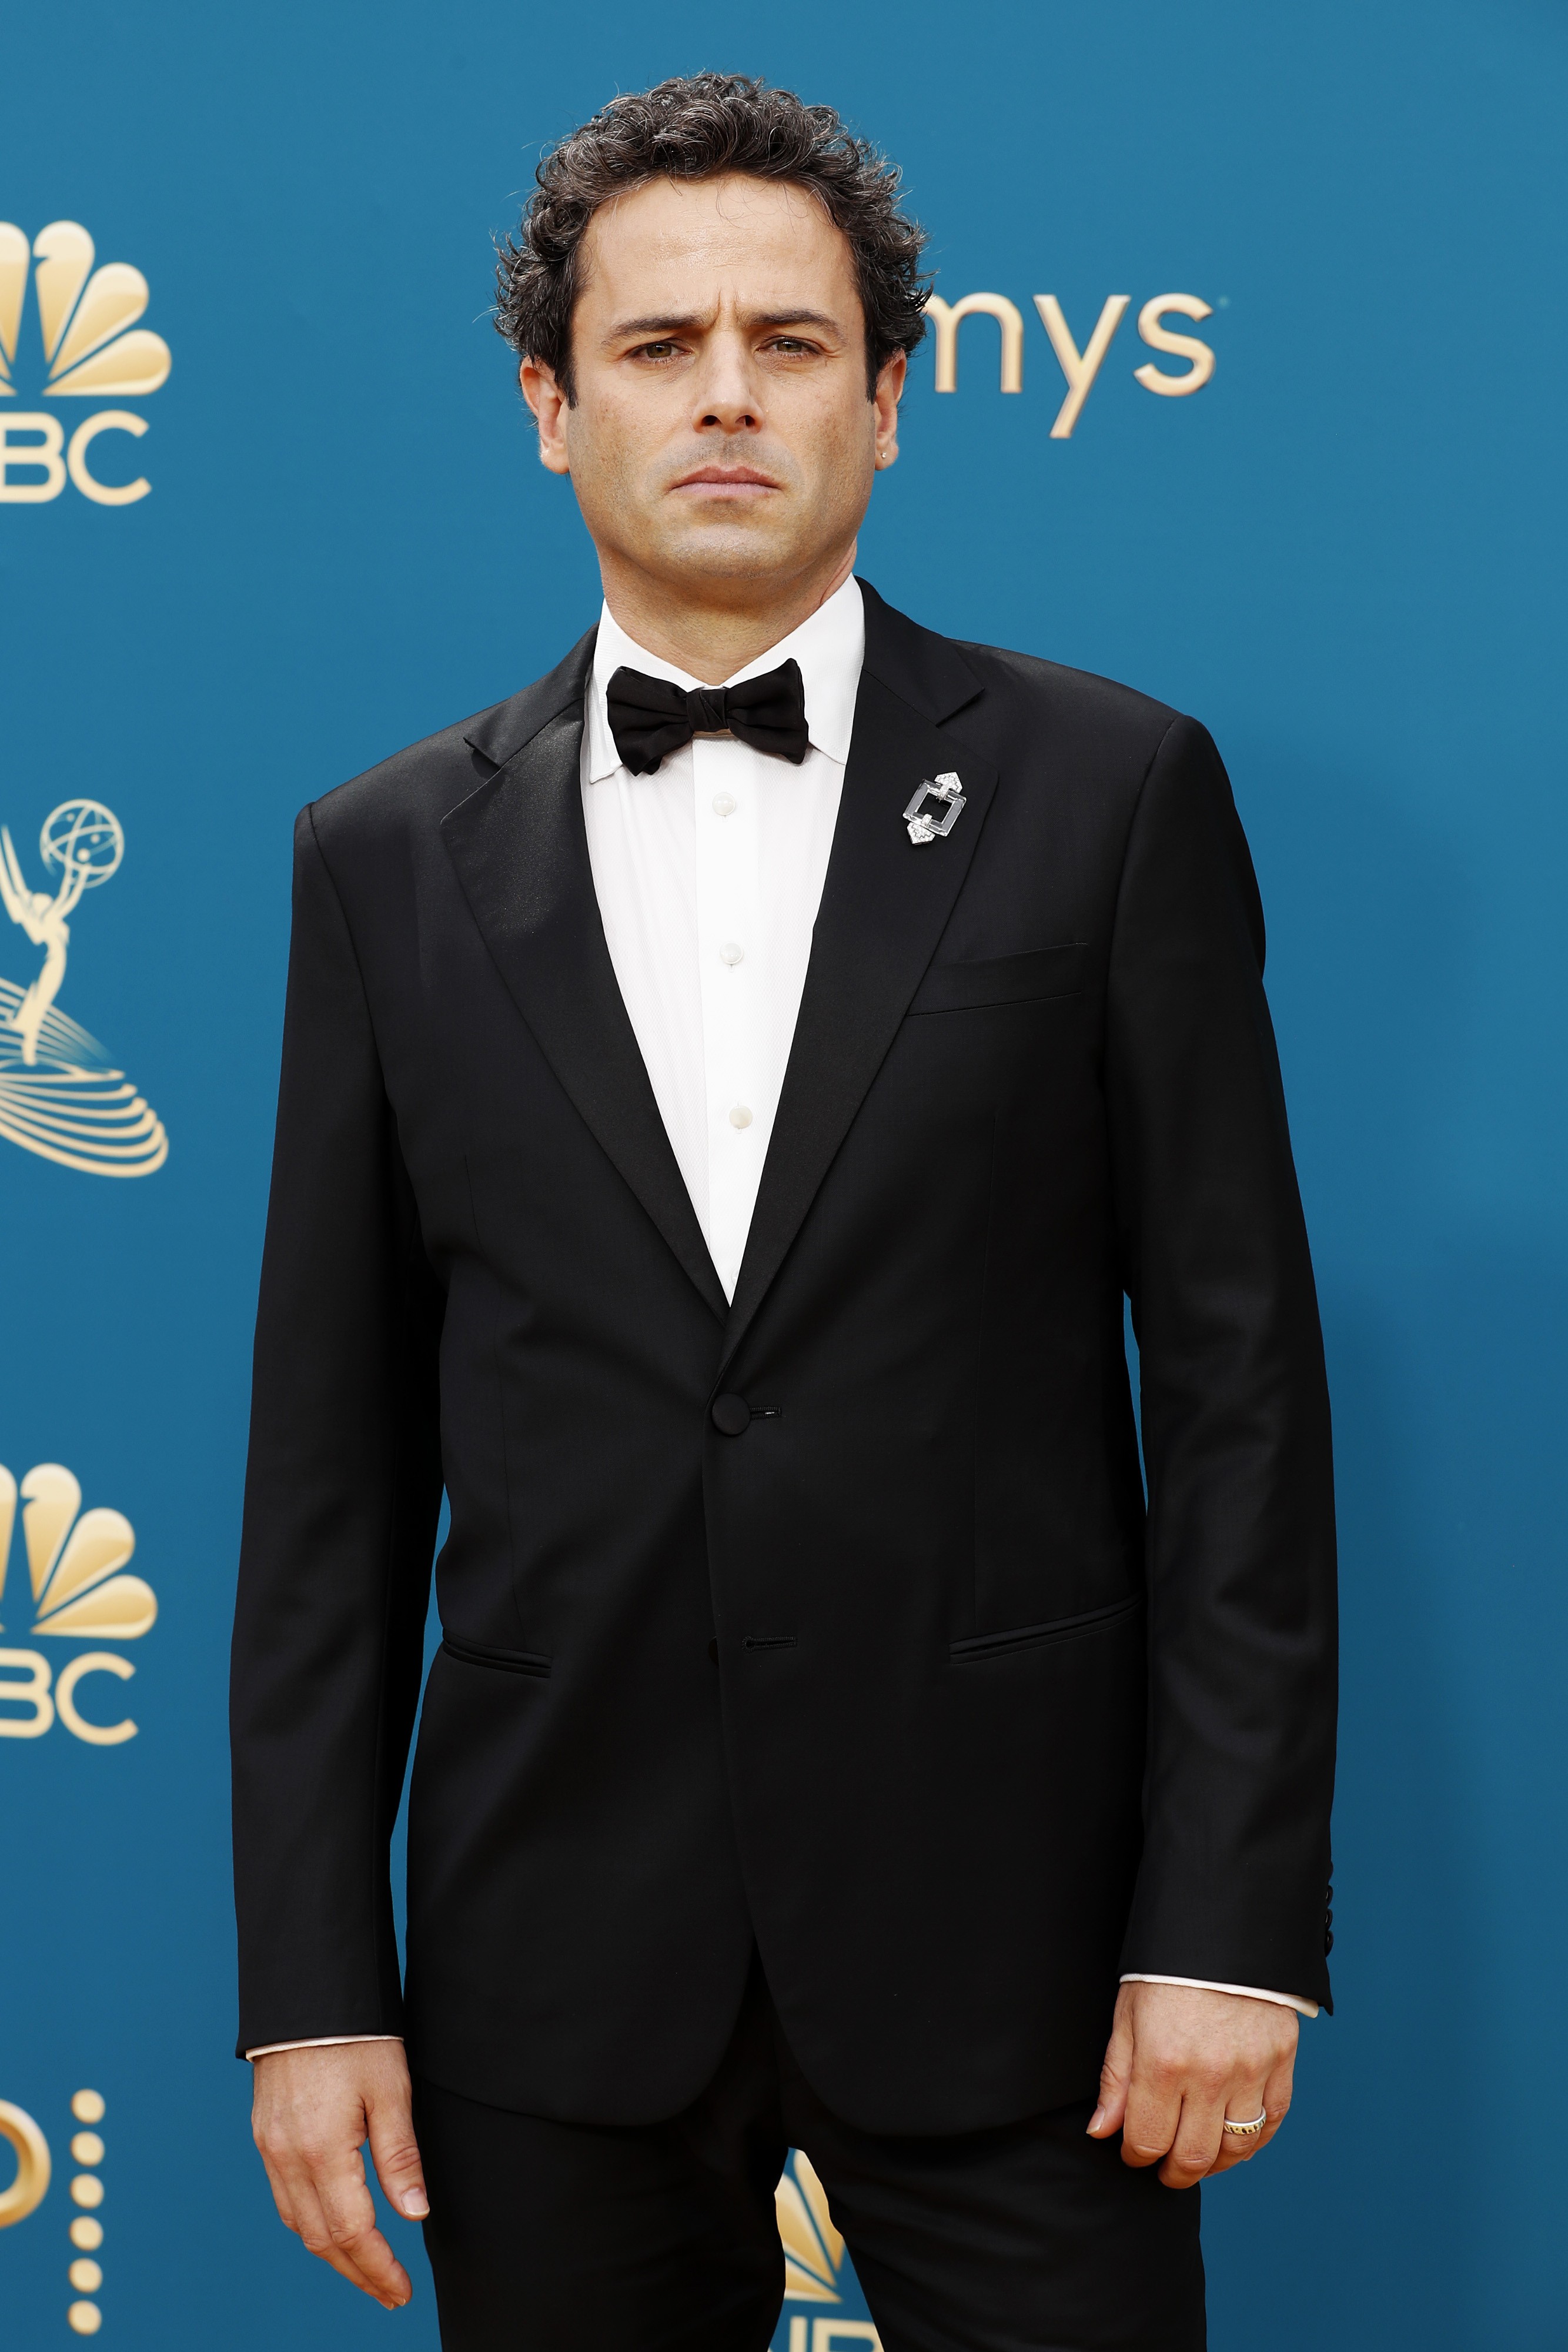 LOS ANGELES, CALIFORNIA - SEPTEMBER 12: 74th ANNUAL PRIMETIME EMMY AWARDS -- Pictured: Luke Kirby arrives to the 74th Annual Primetime Emmy Awards held at the Microsoft Theater on September 12, 2022. -- (Photo by Trae Patton/NBC via Getty Images) (Foto: NBC via Getty Images)